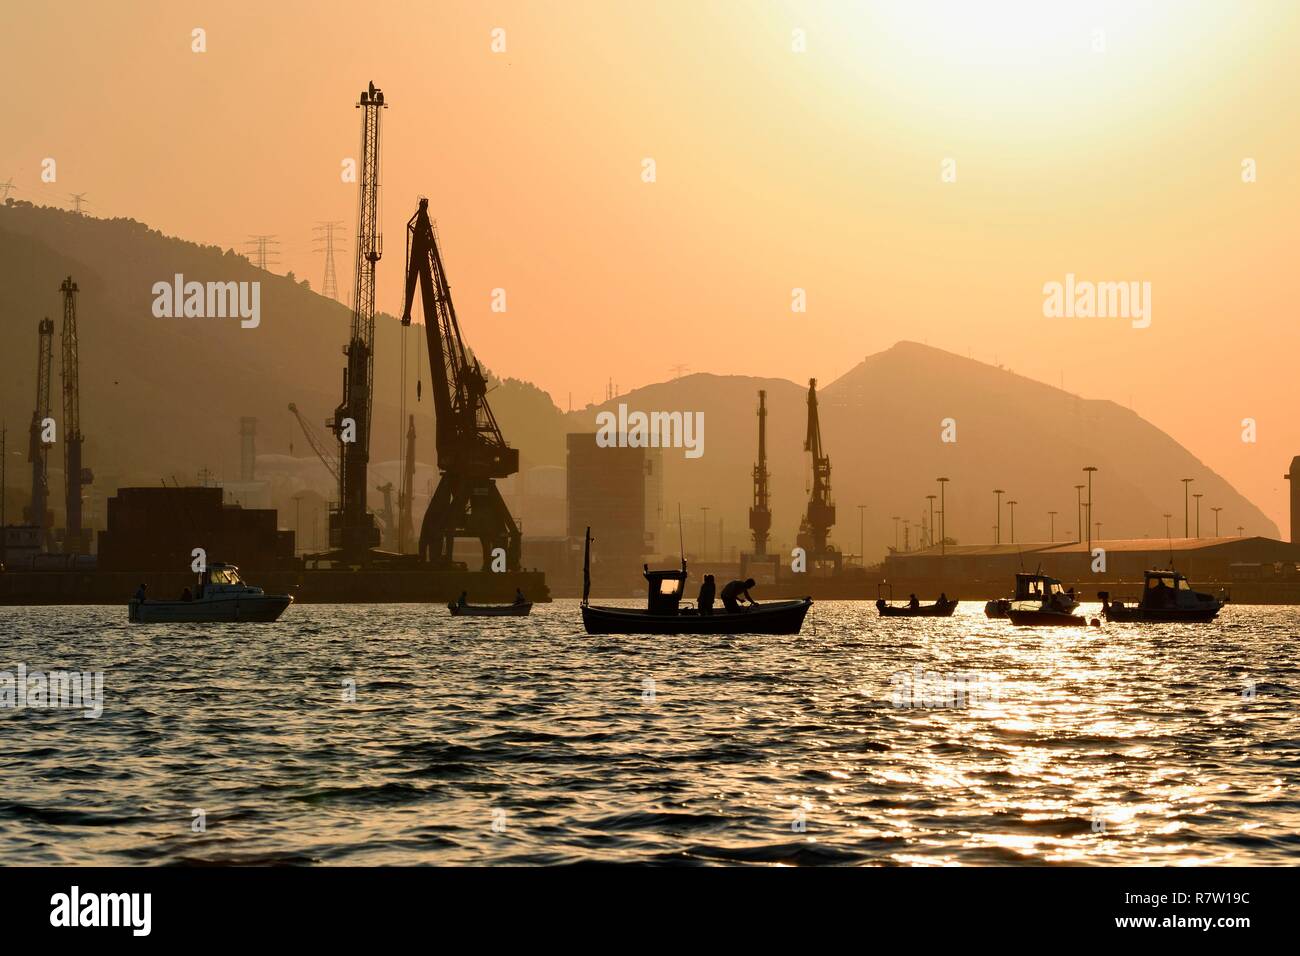 Spain, Basque Country, Biscay Province, Santurtzi, industrial port of Bilbao at the mouth of the river Nervion Stock Photo